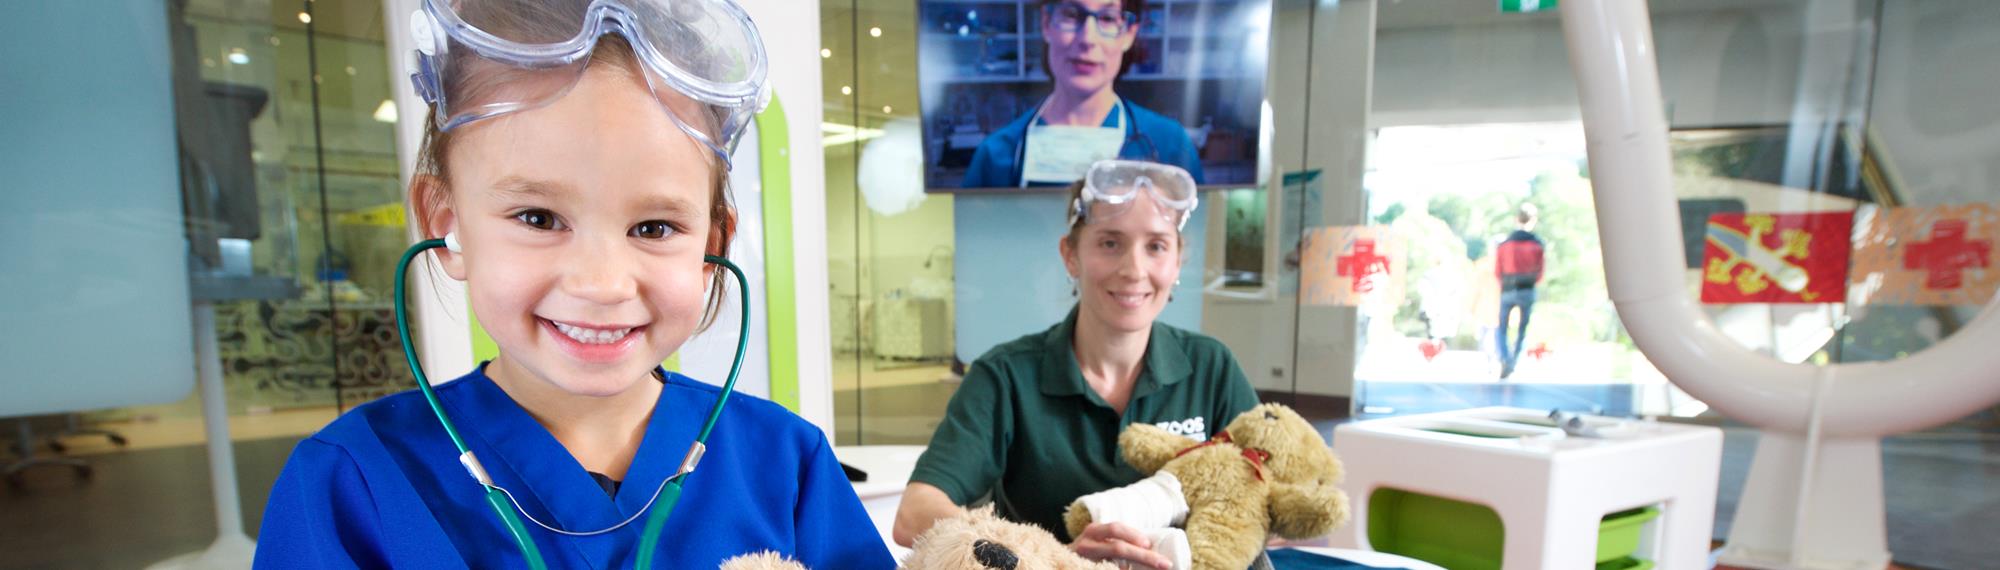 A young guest, happily playing veteranarian with her plush bear, accompanied by a volunteer behind her and both smiling to the camera, in the Australian Wildlife Health Centre.